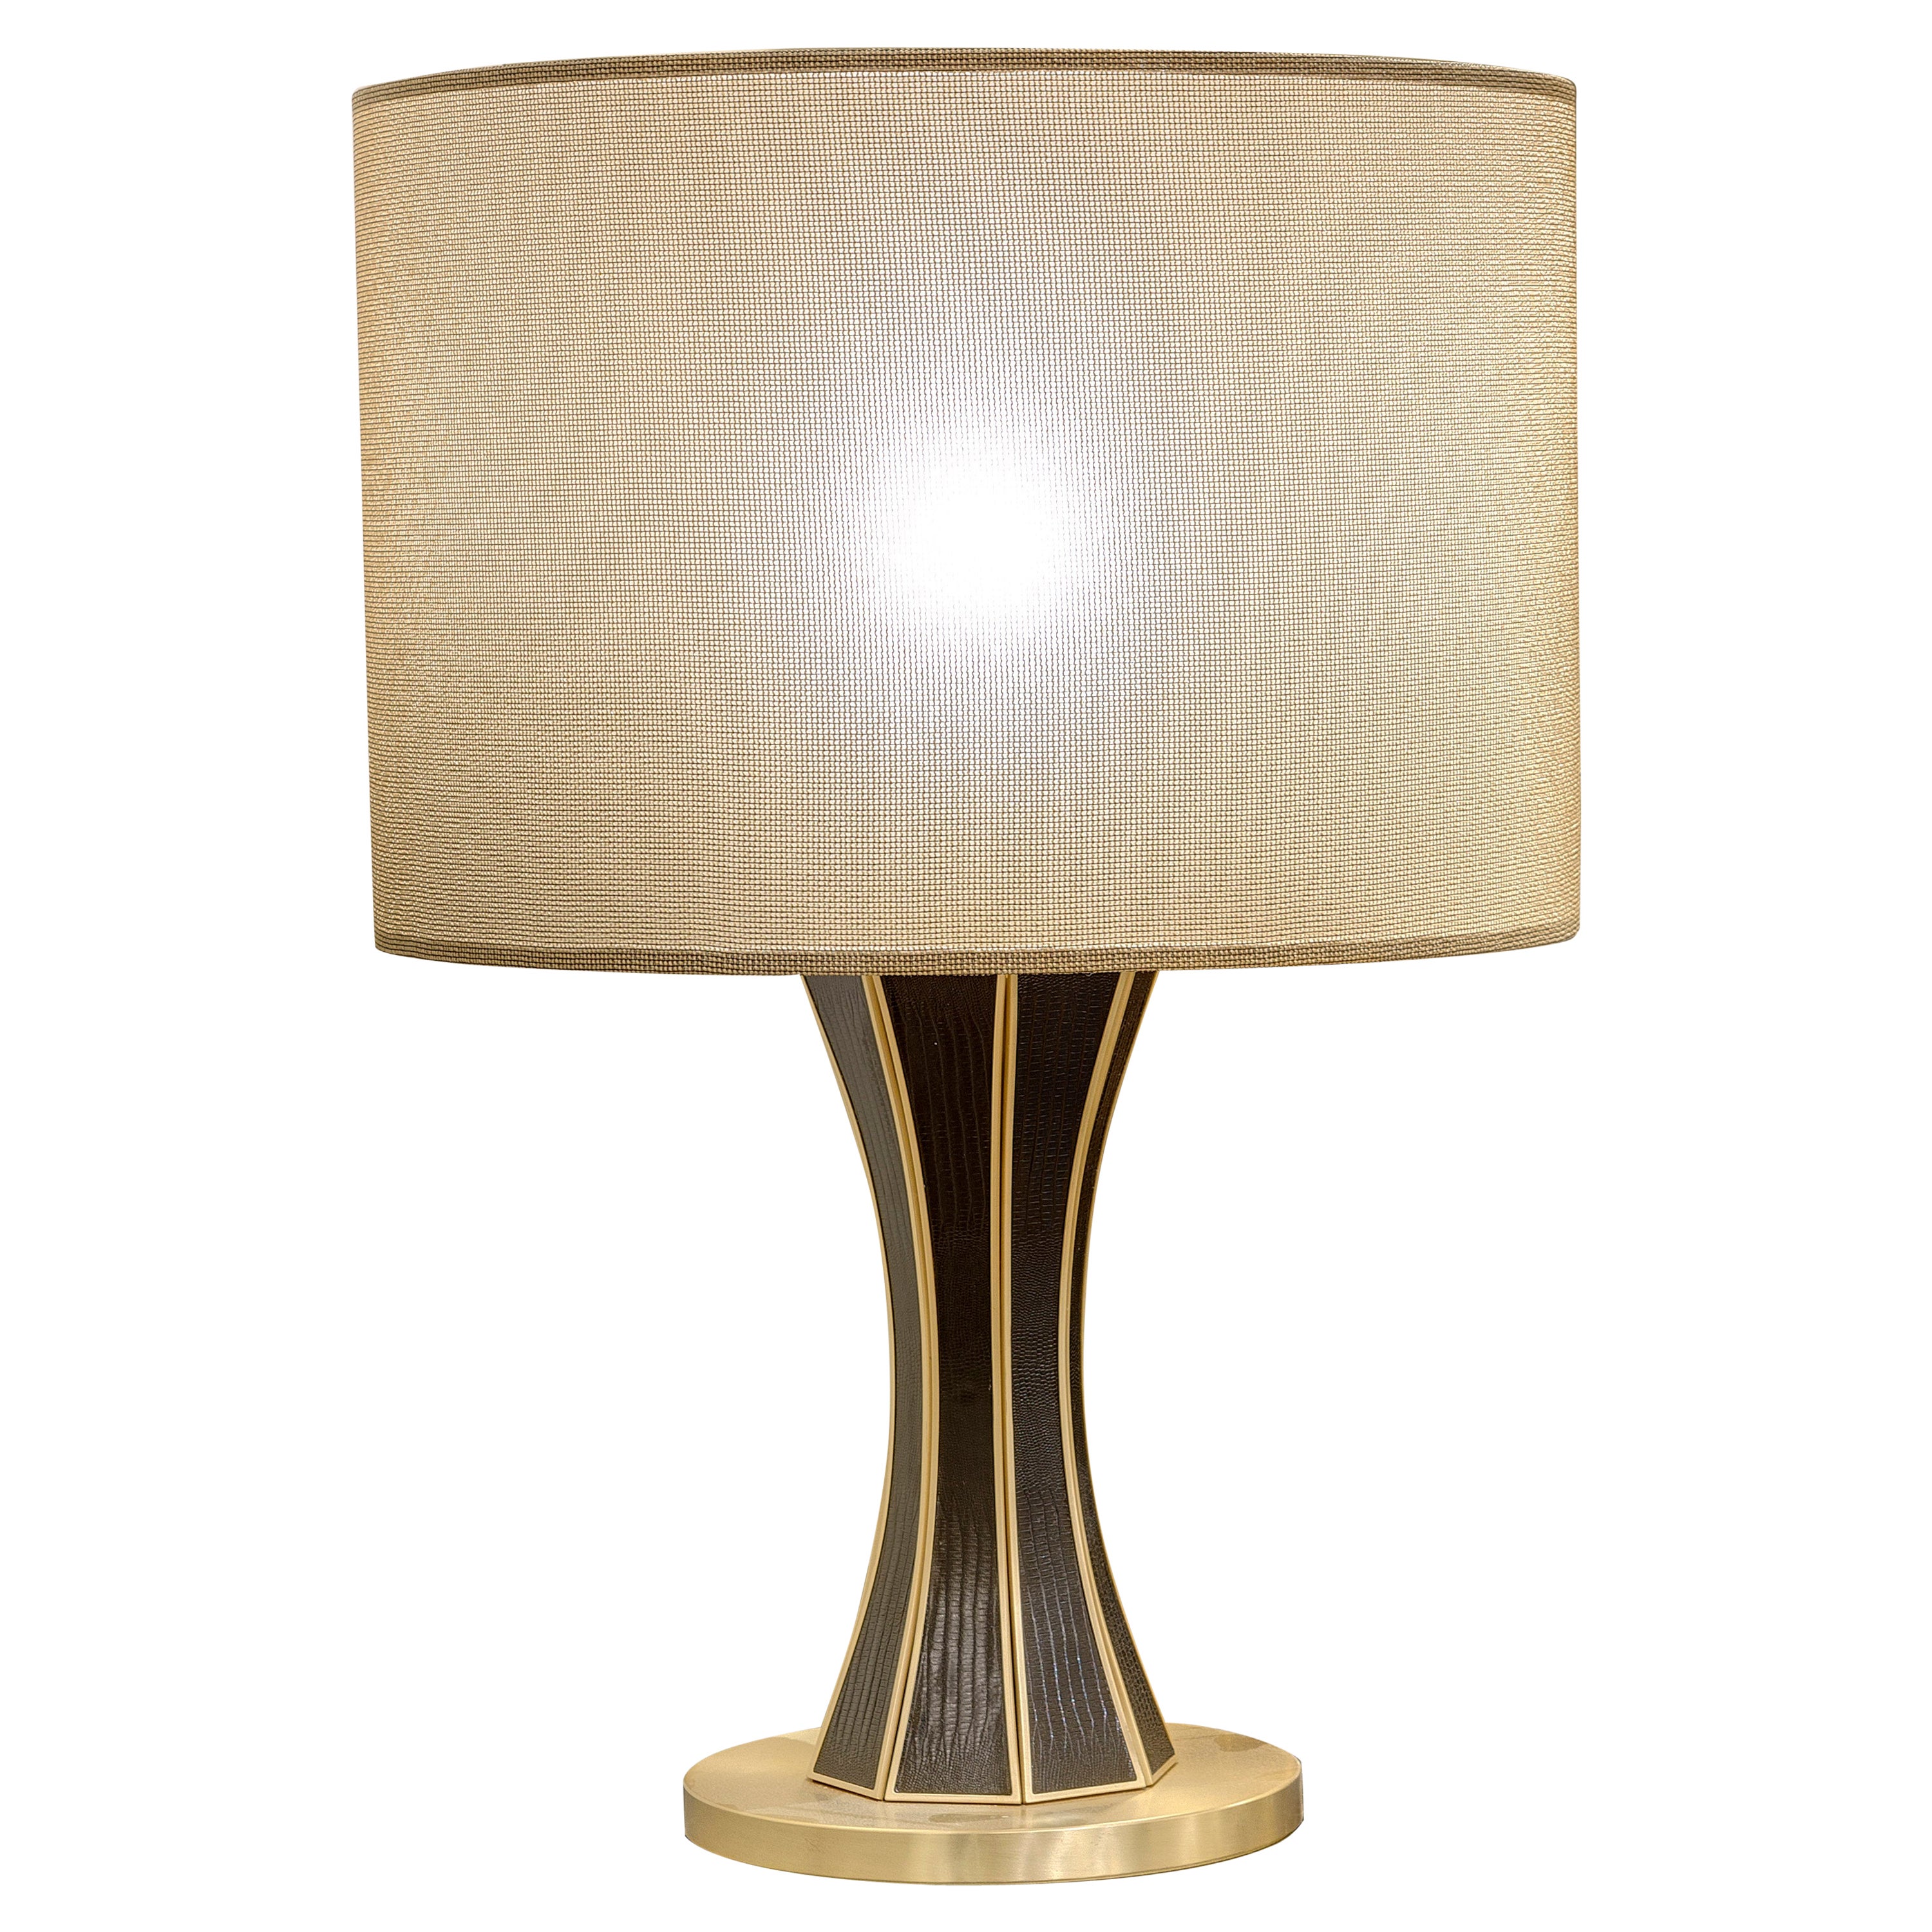 New Flow Table Lamp 2131 Gk 24 By, Broyhill Crystal Table Lamps